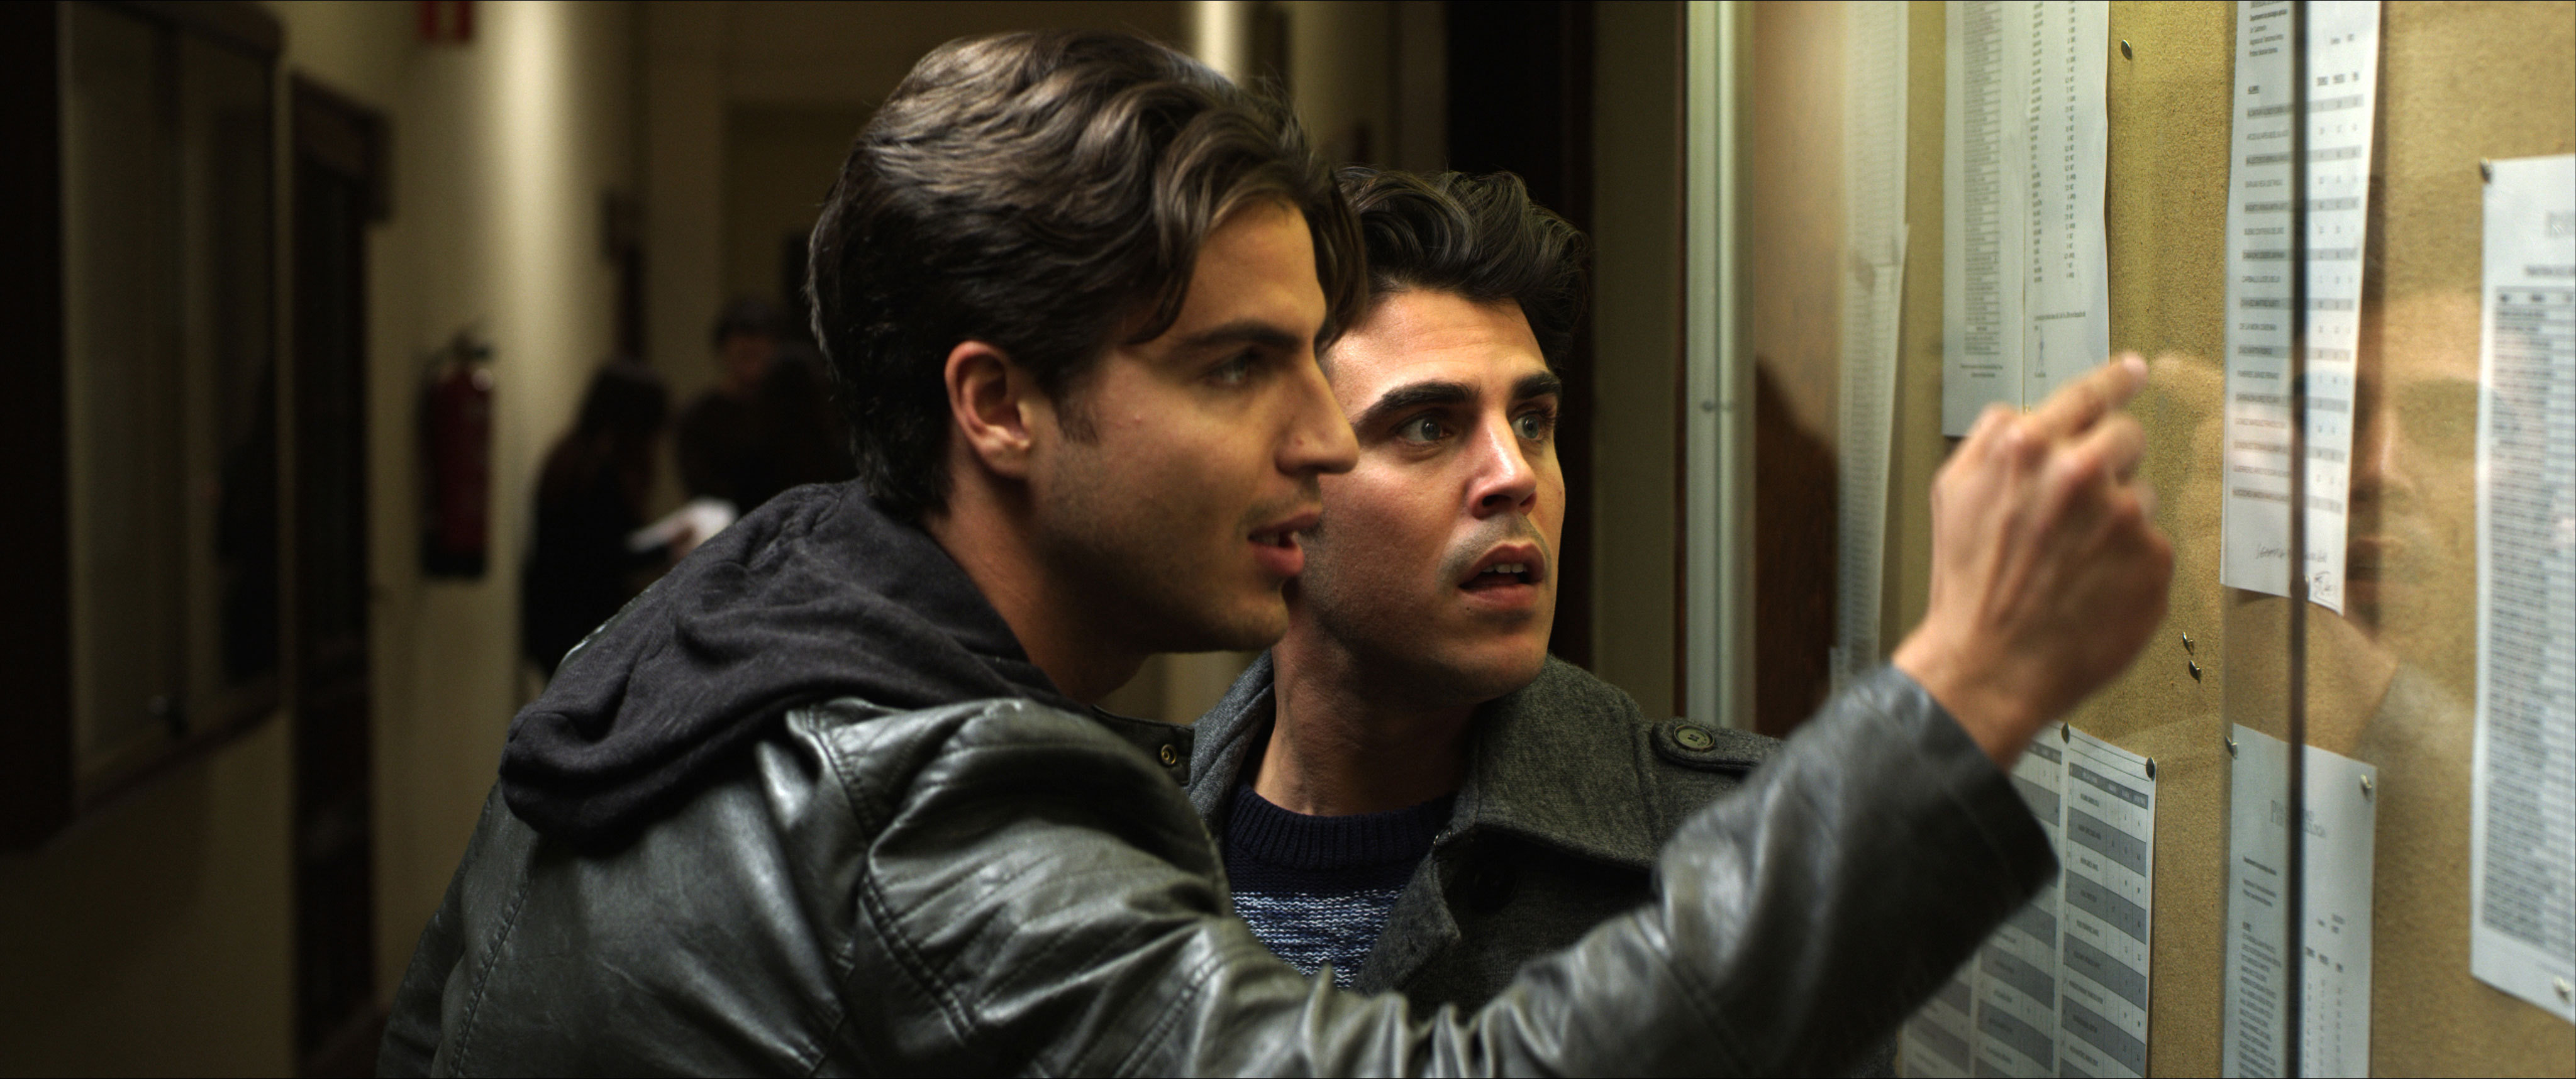 Still of Maxi Iglesias and Javier Hernández in Asesinos inocentes (2015)